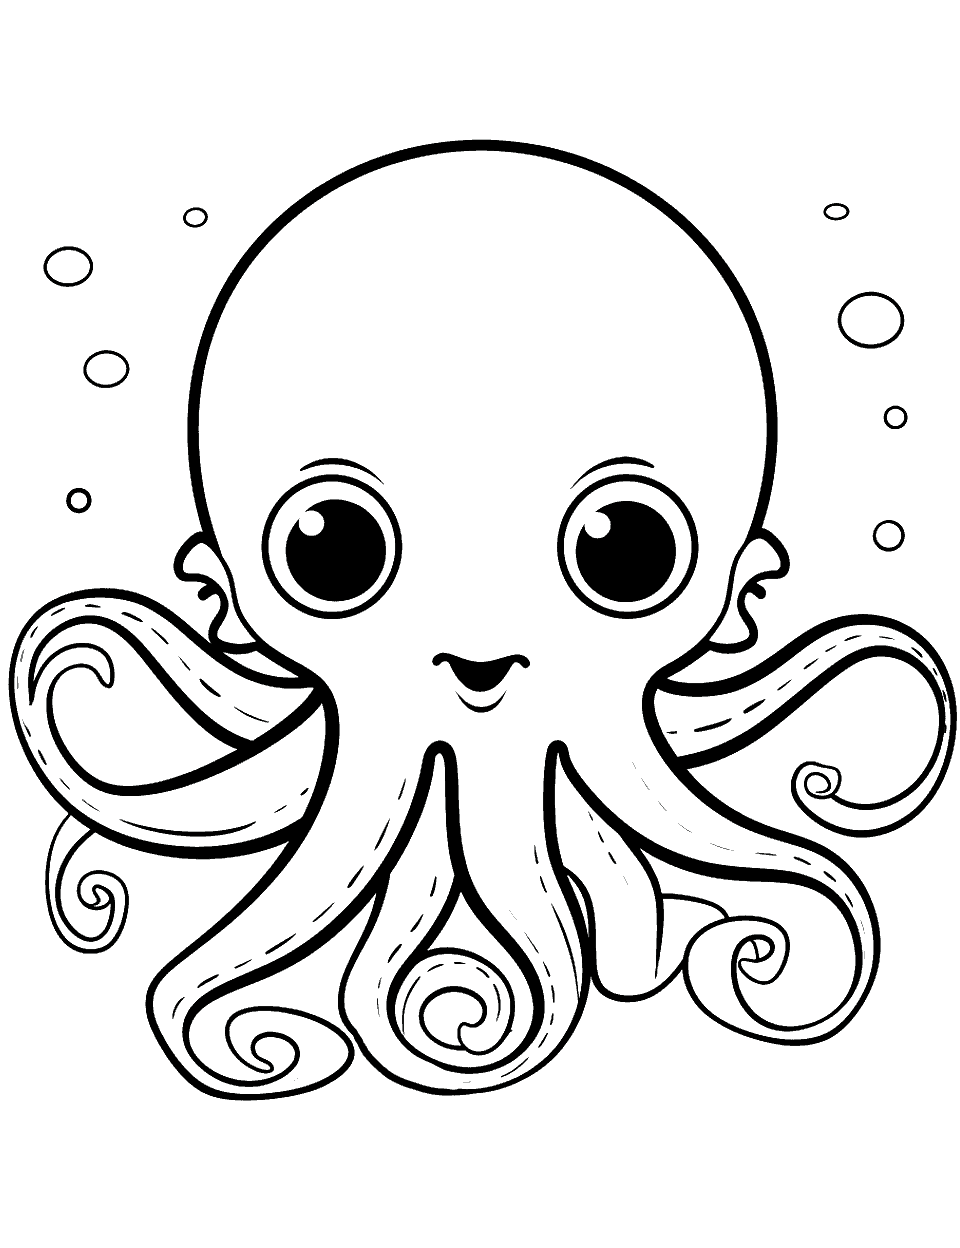 Baby Octopus Learning to Swim Coloring Page - A small, charming baby octopus happily swimming.